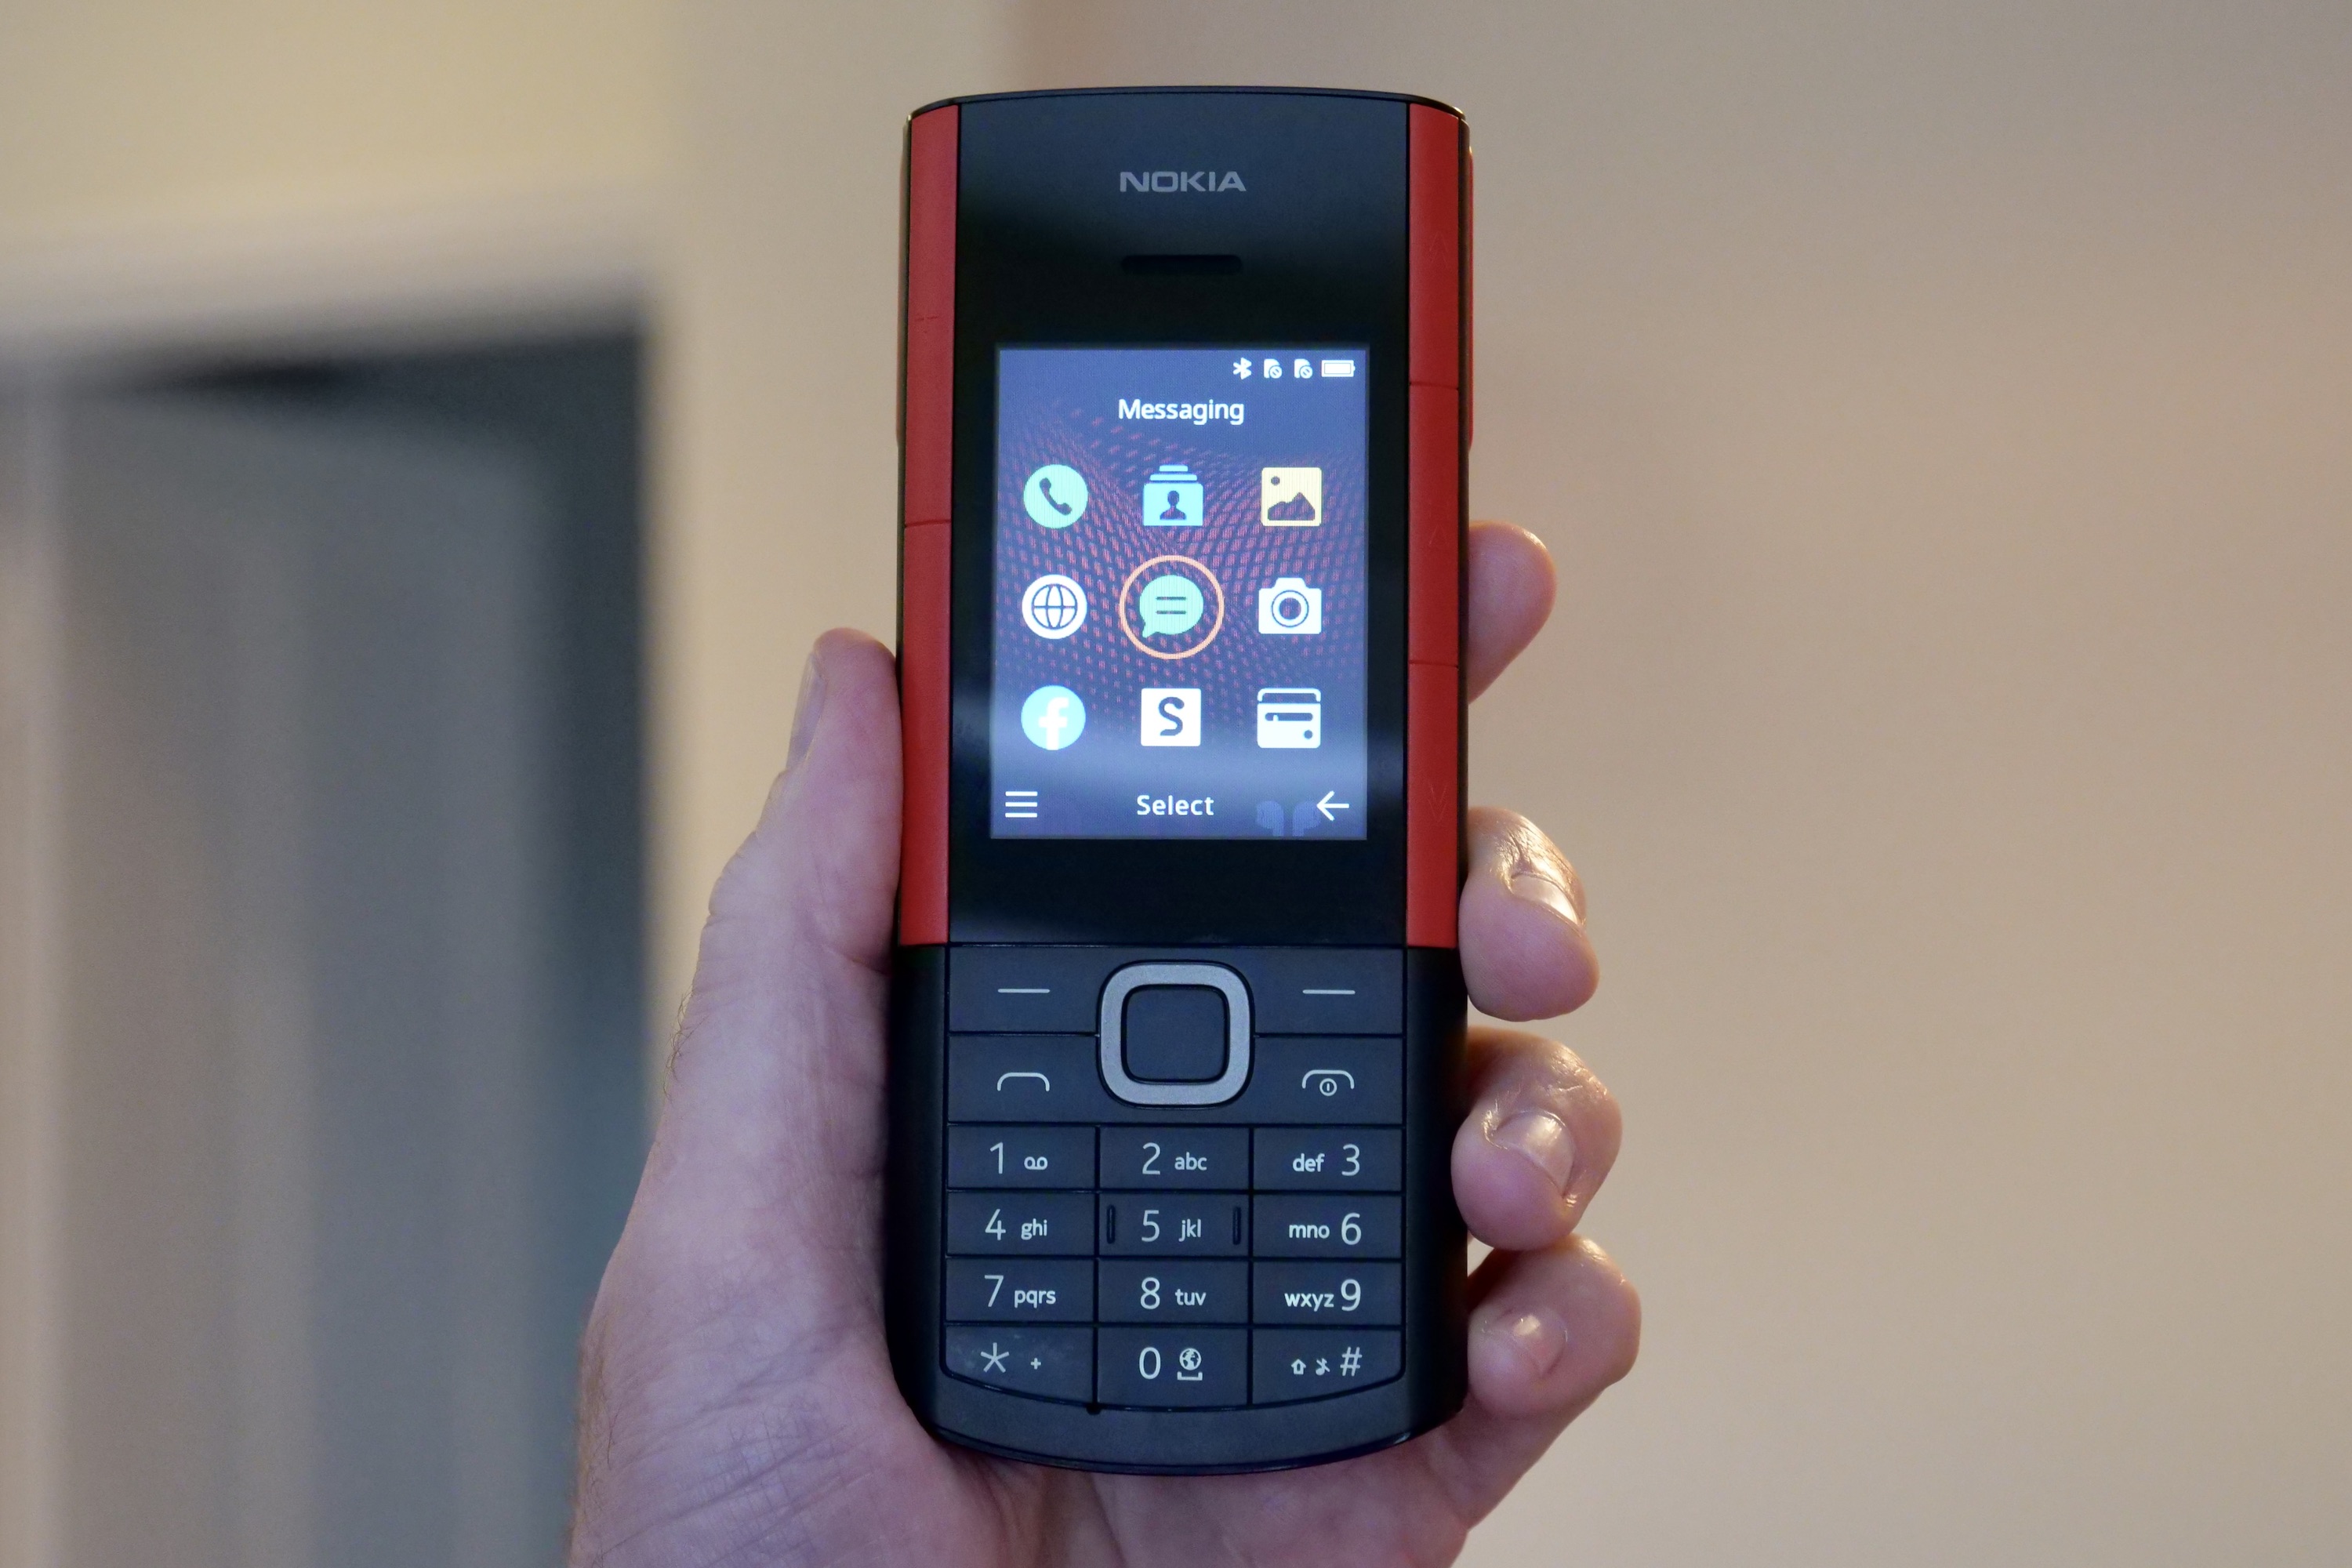 The front of the Nokia 5710 XpressAudio.